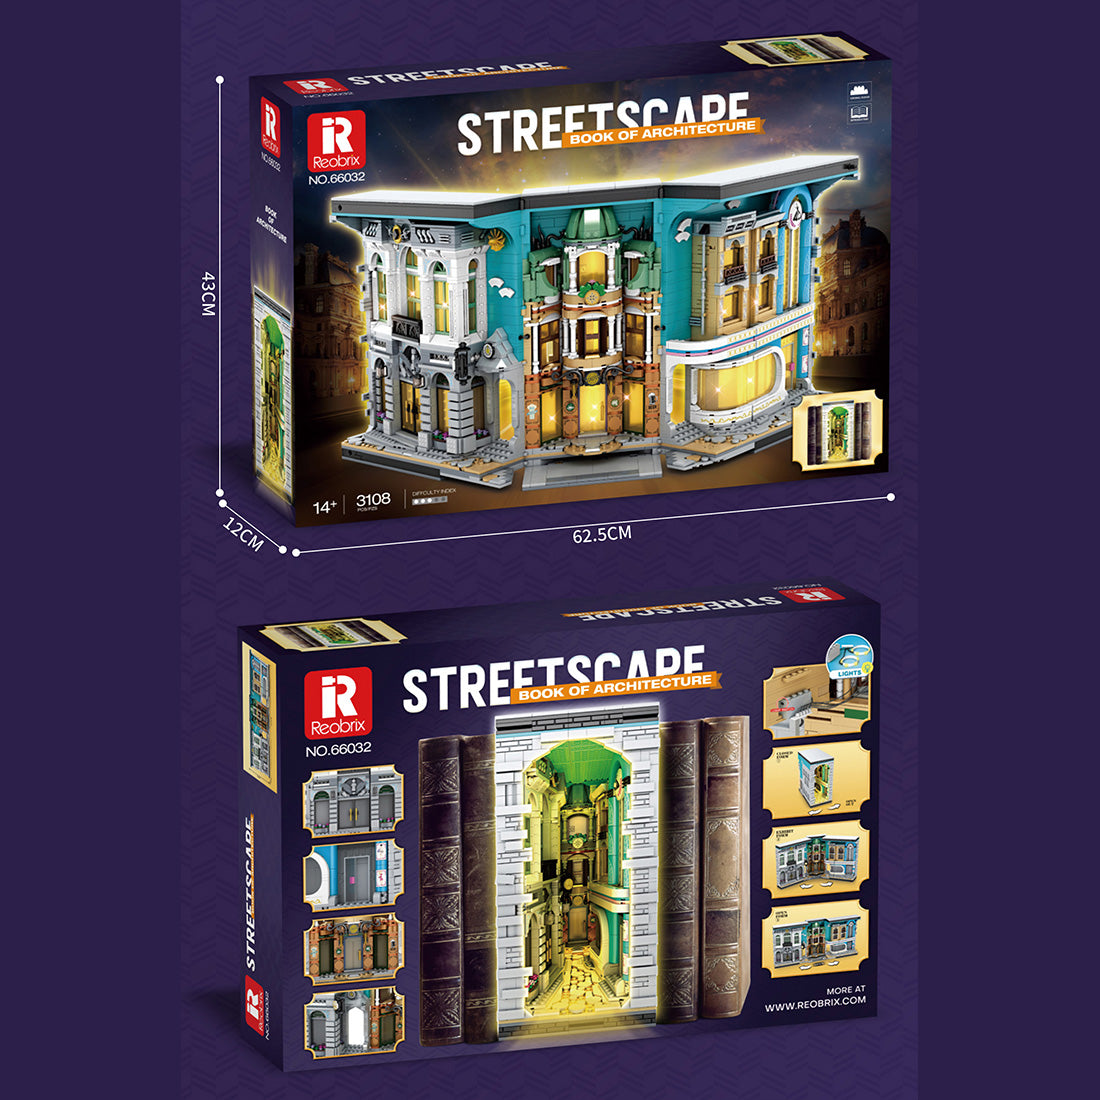 Reobrix 66032 Streetscape Book of Architecture 3108pcs 63.5 × 14 × 29.5 cm (Without Original Packaging)